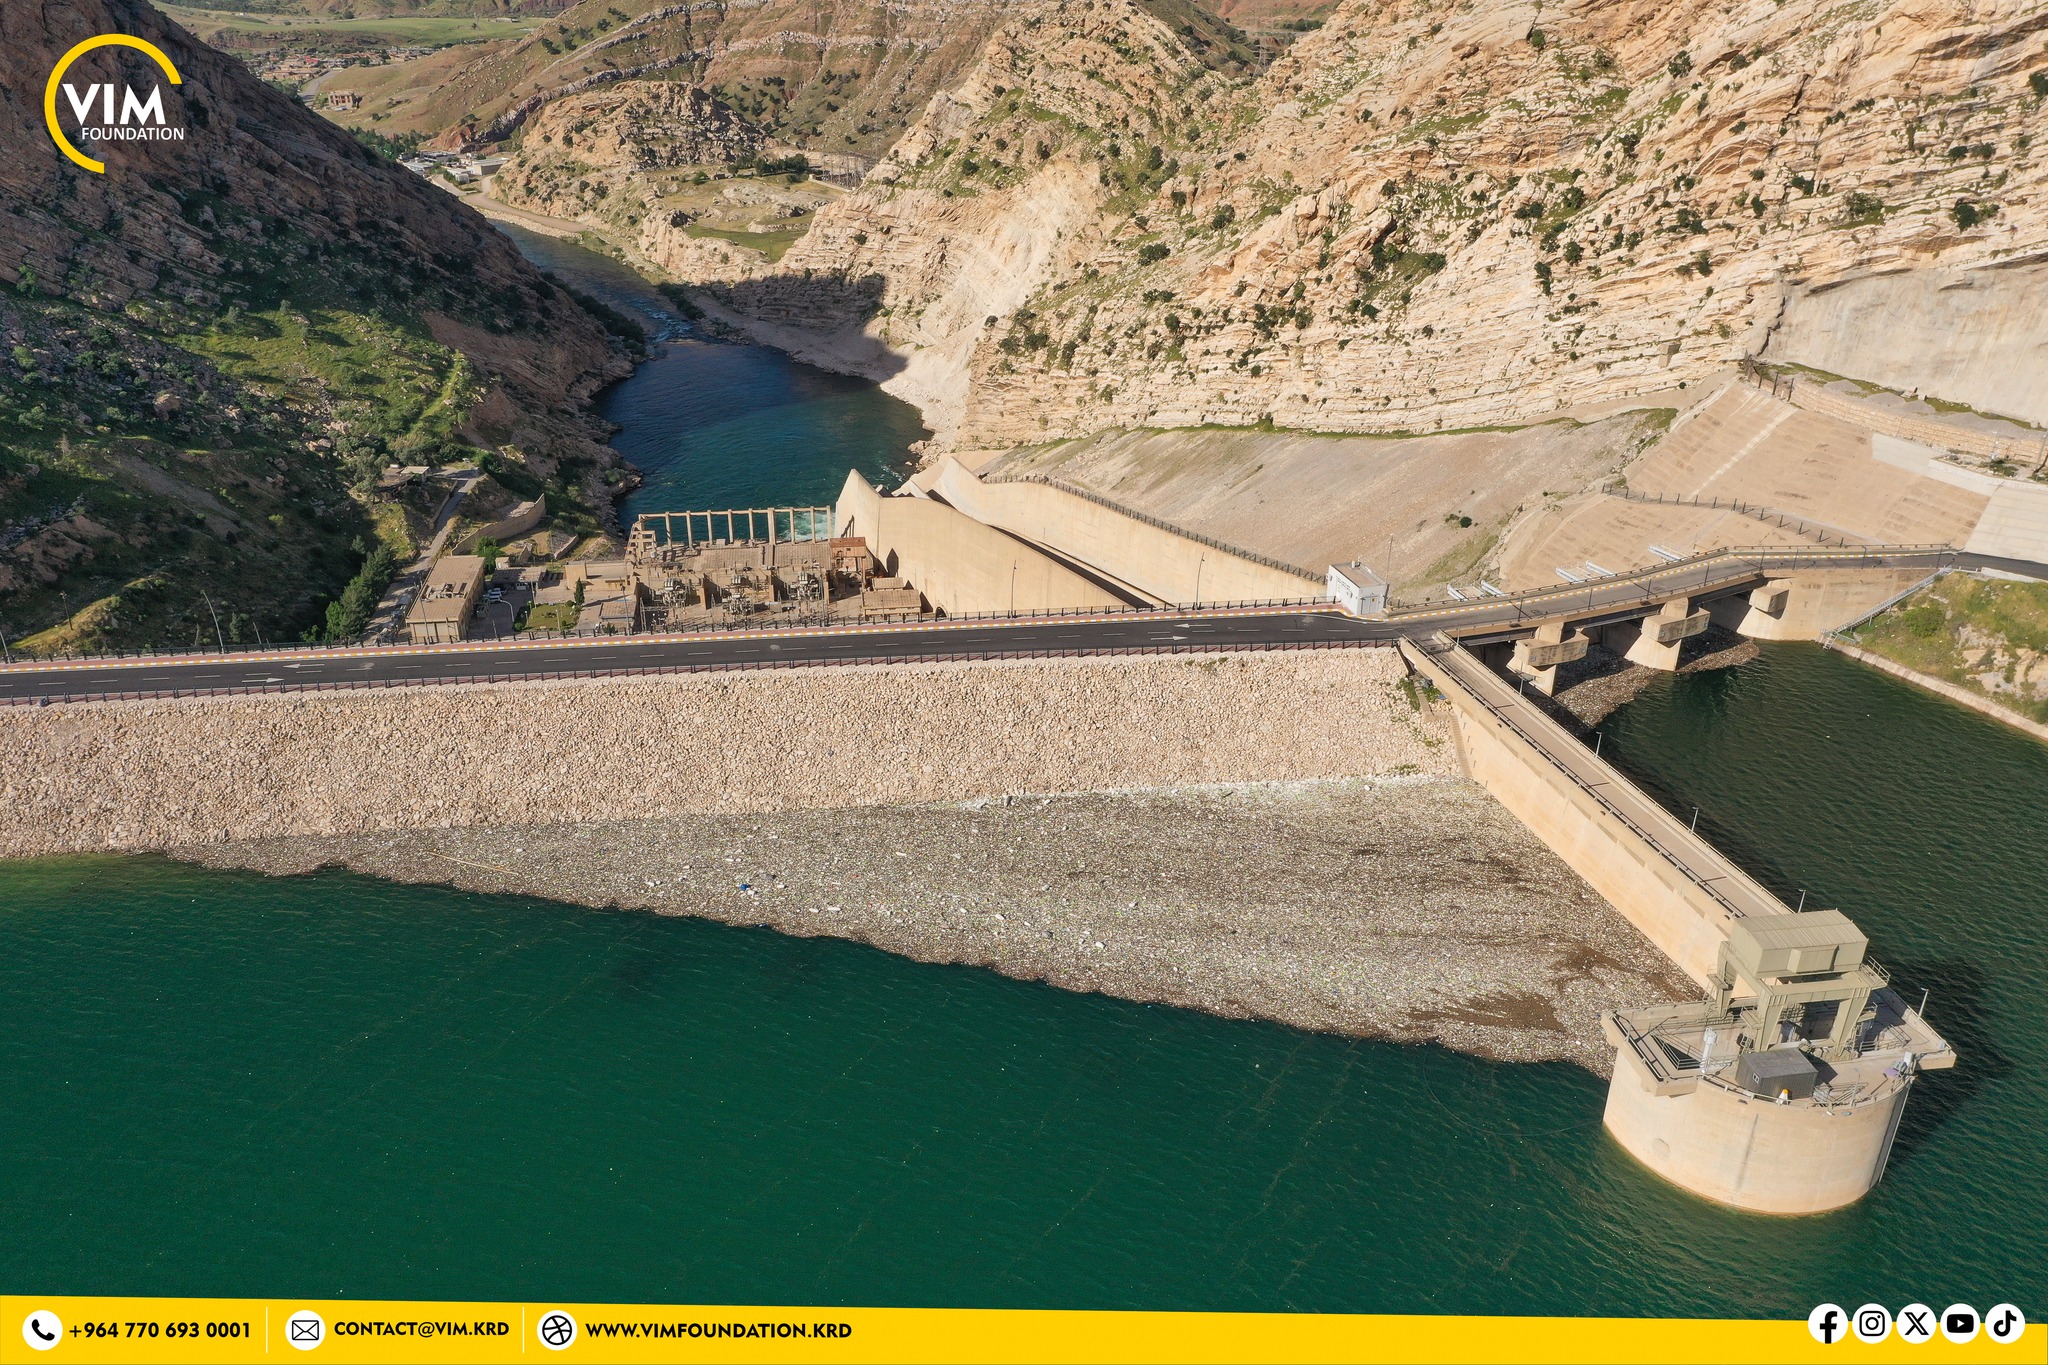 Today, Vim Foundation embarked on an unprecedented initiative to clean up the Darbandikhan Dam.